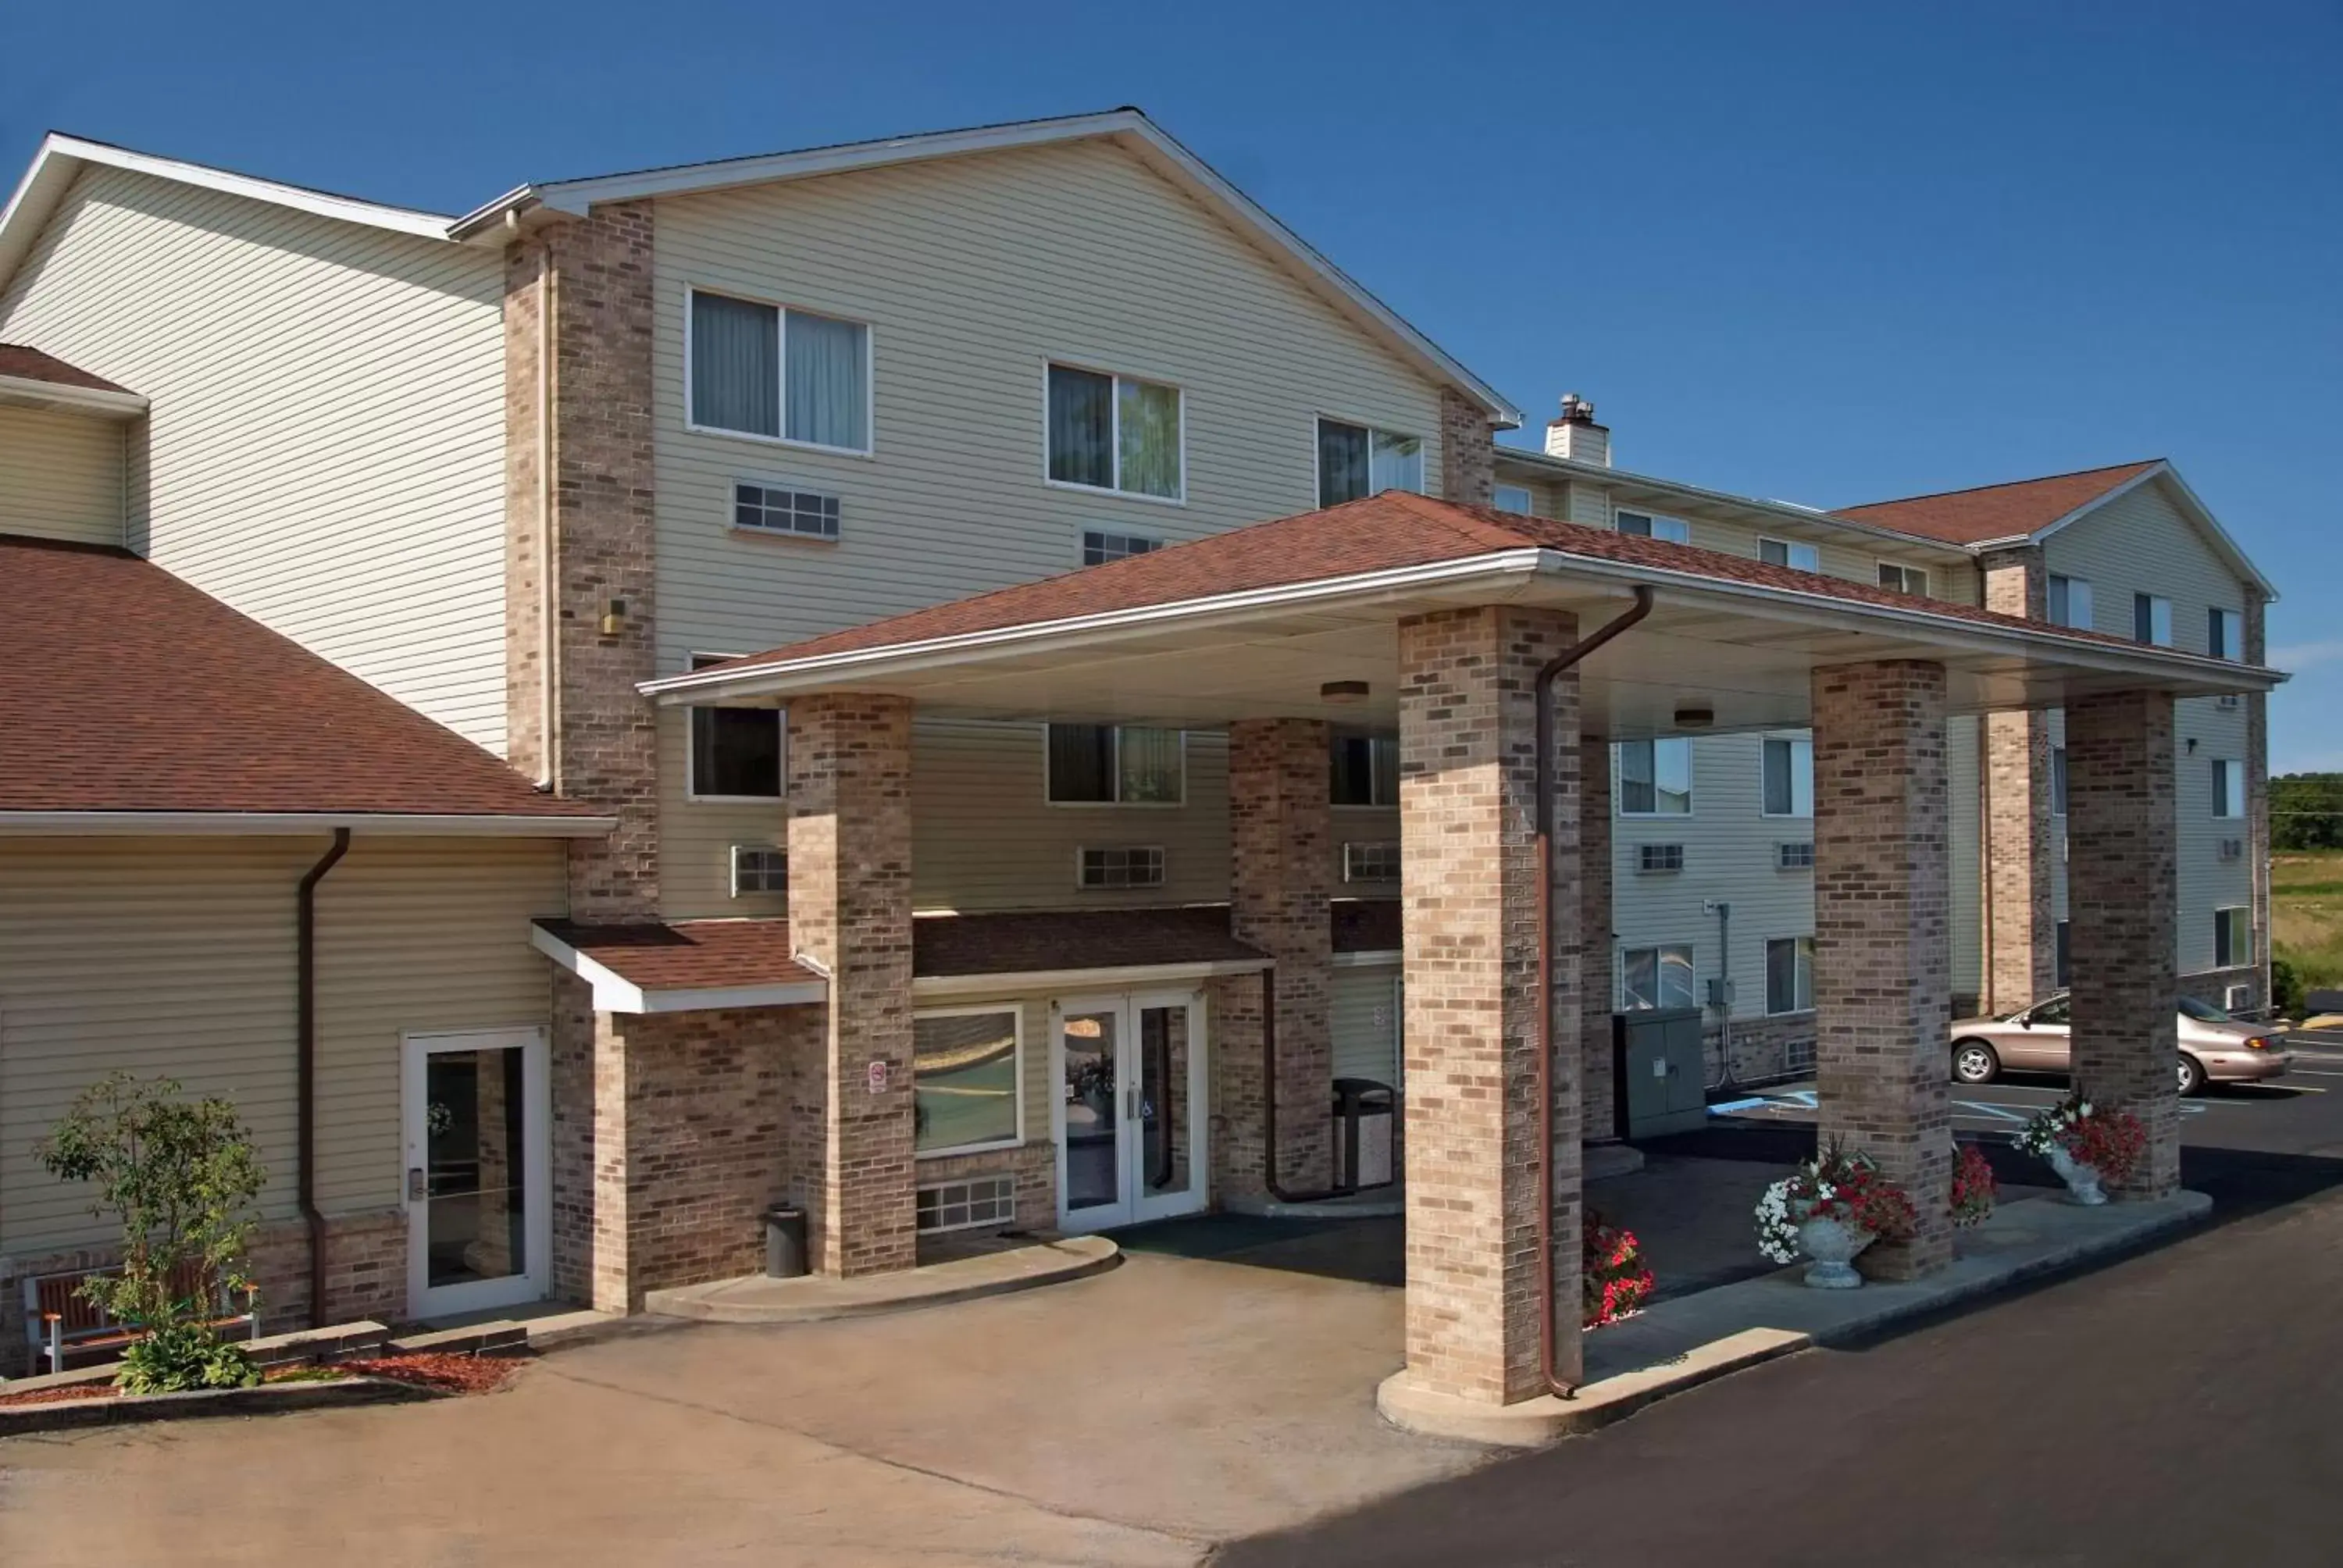 Property Building in Red Roof Inn Osage Beach - Lake of the Ozarks